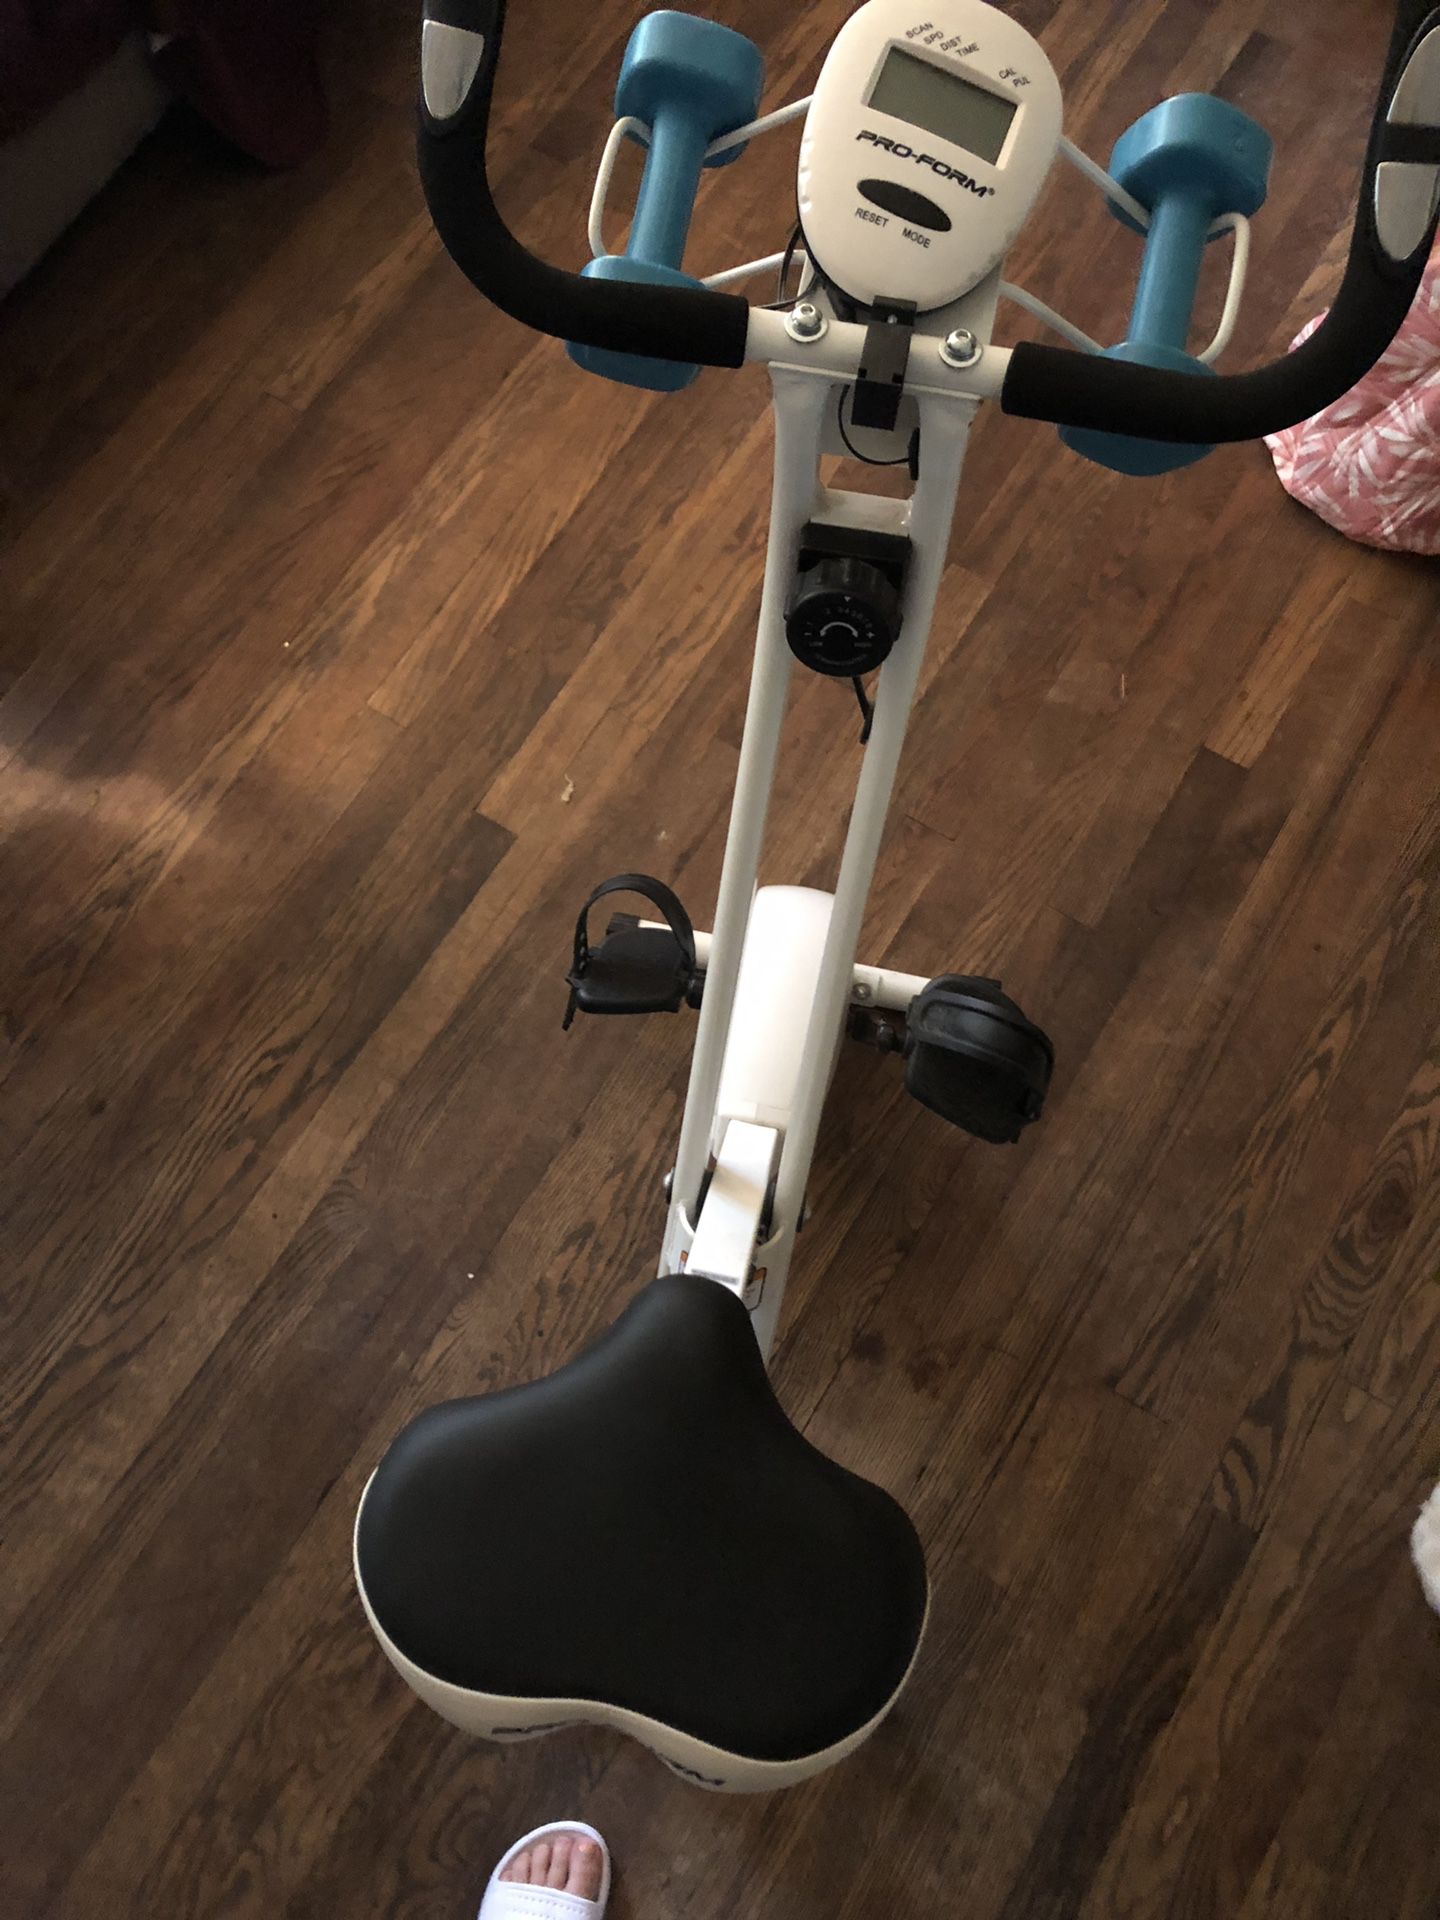 Exercise bike with weights. Folding for storage